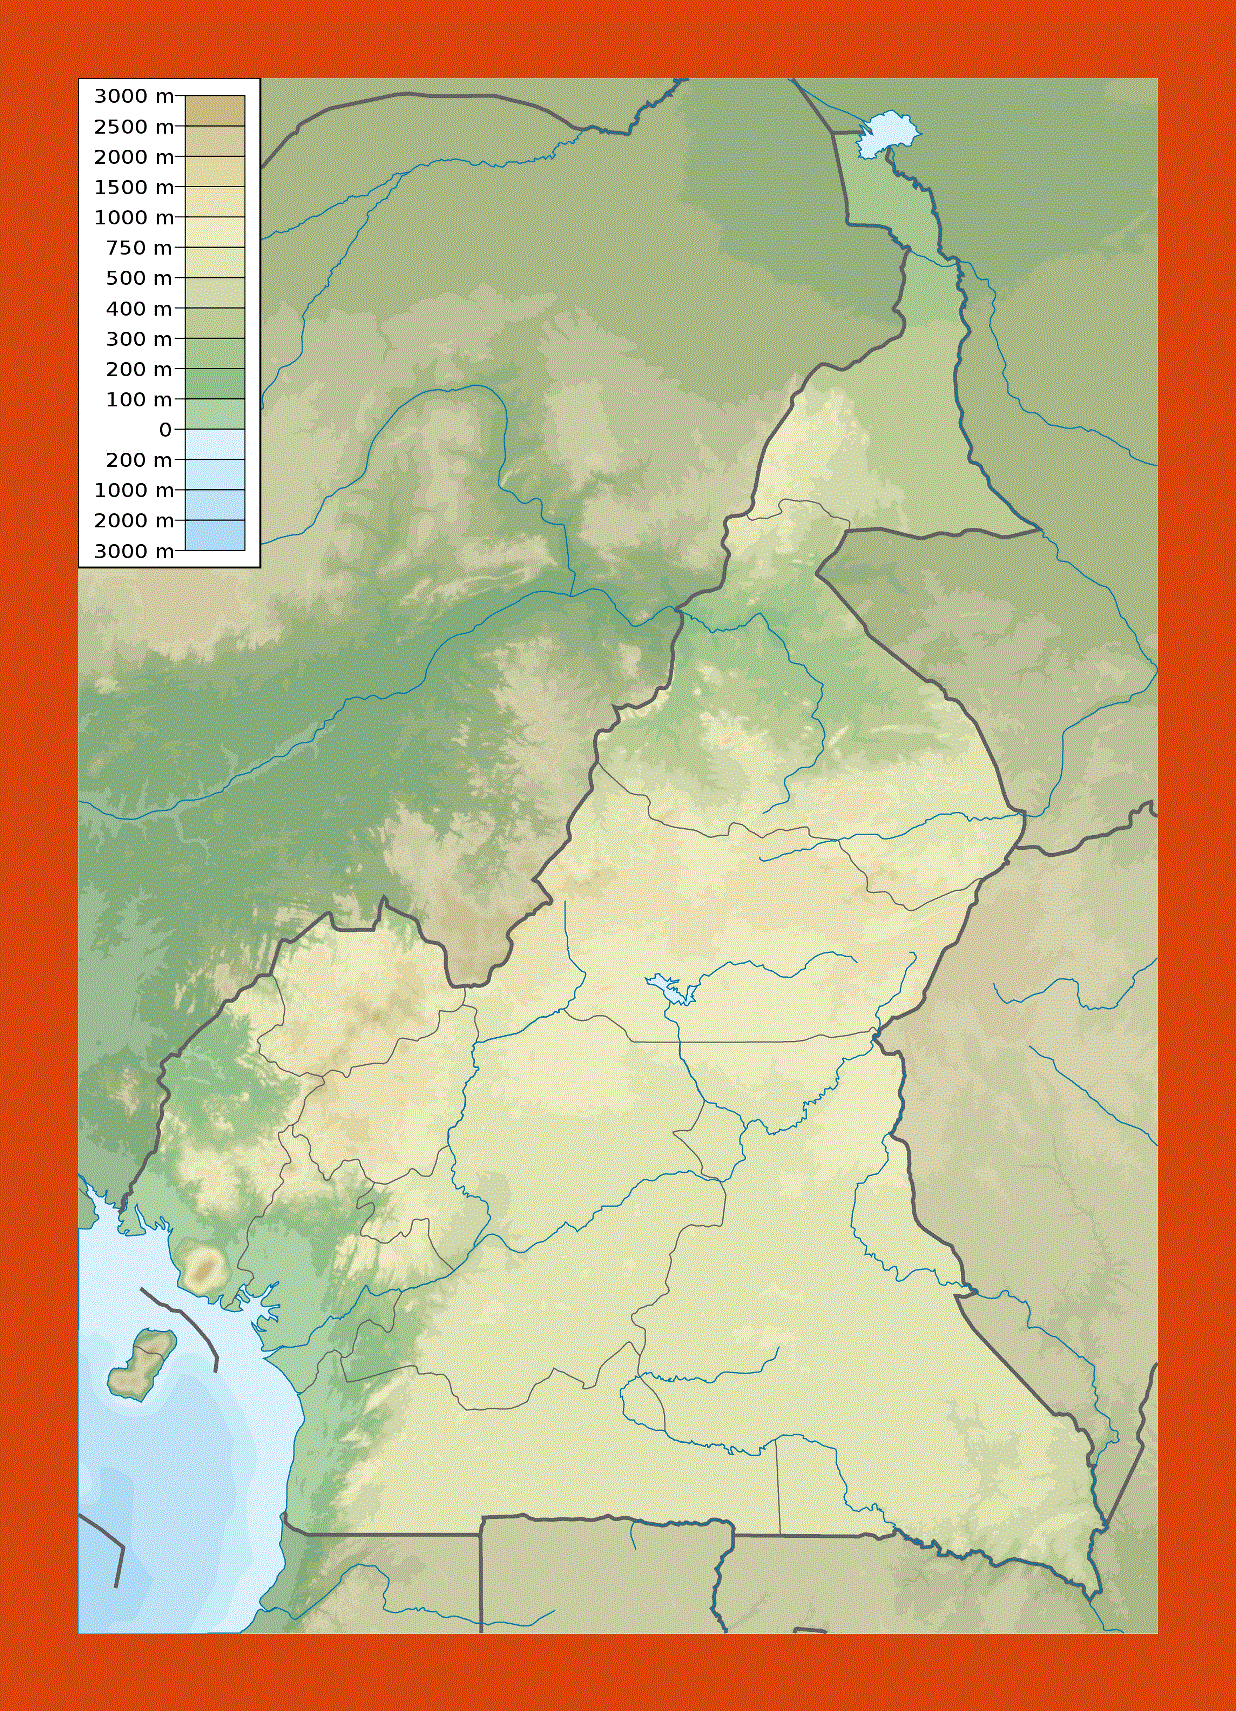 Elevation map of Cameroon